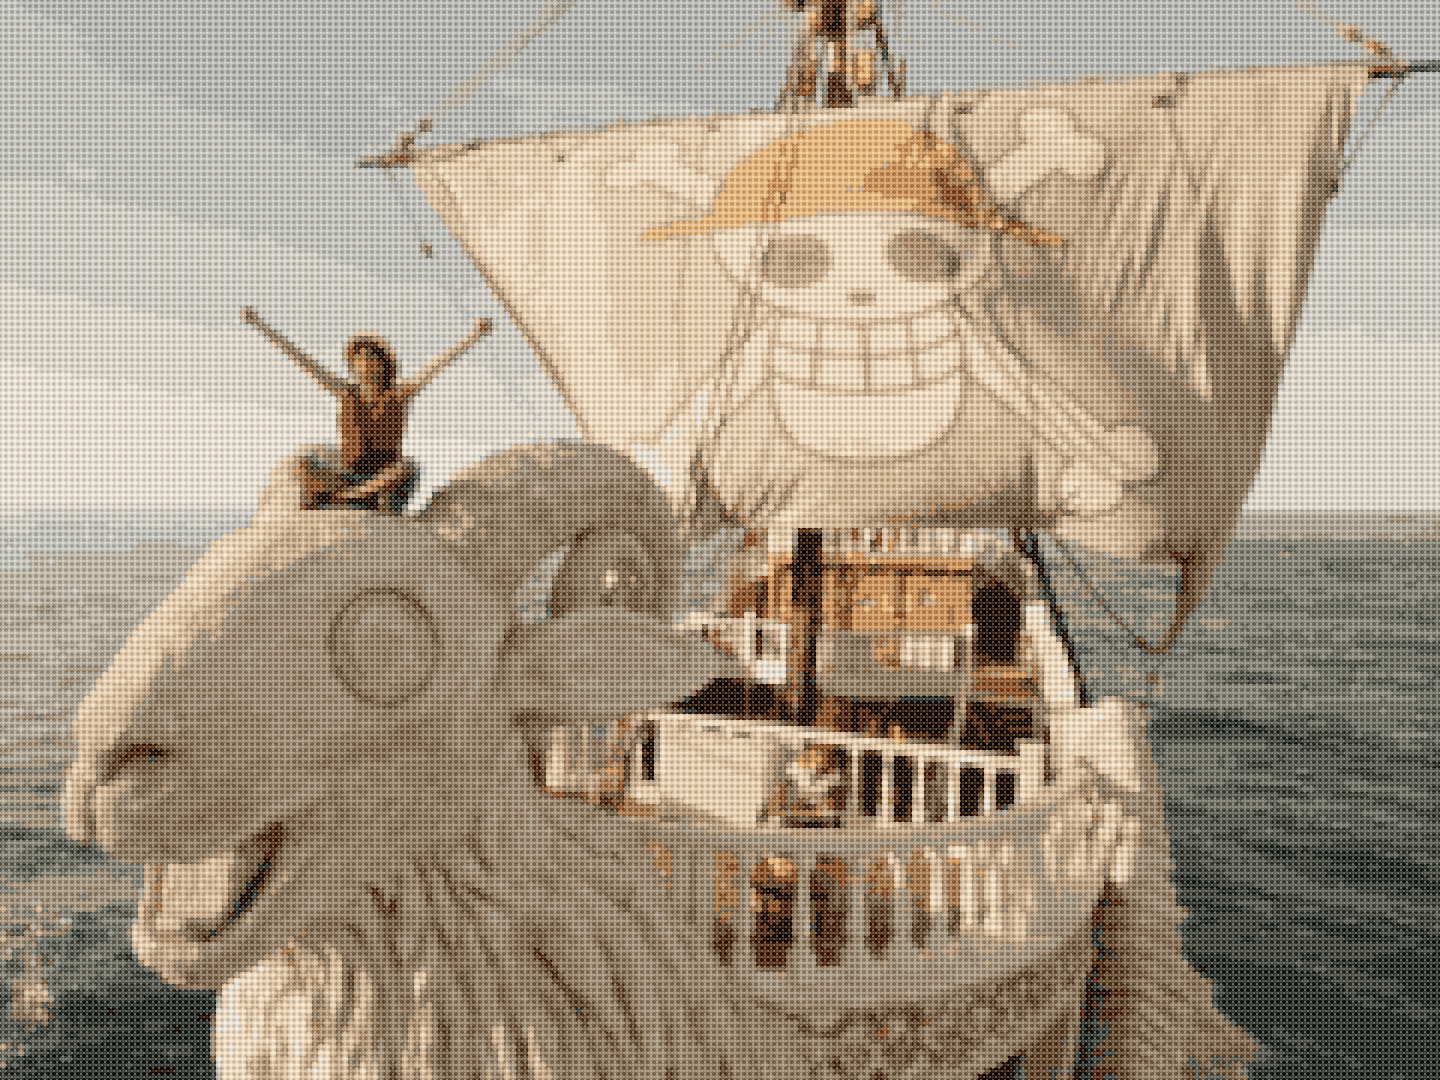 The Going Merry [One Piece] by Humble-T on DeviantArt